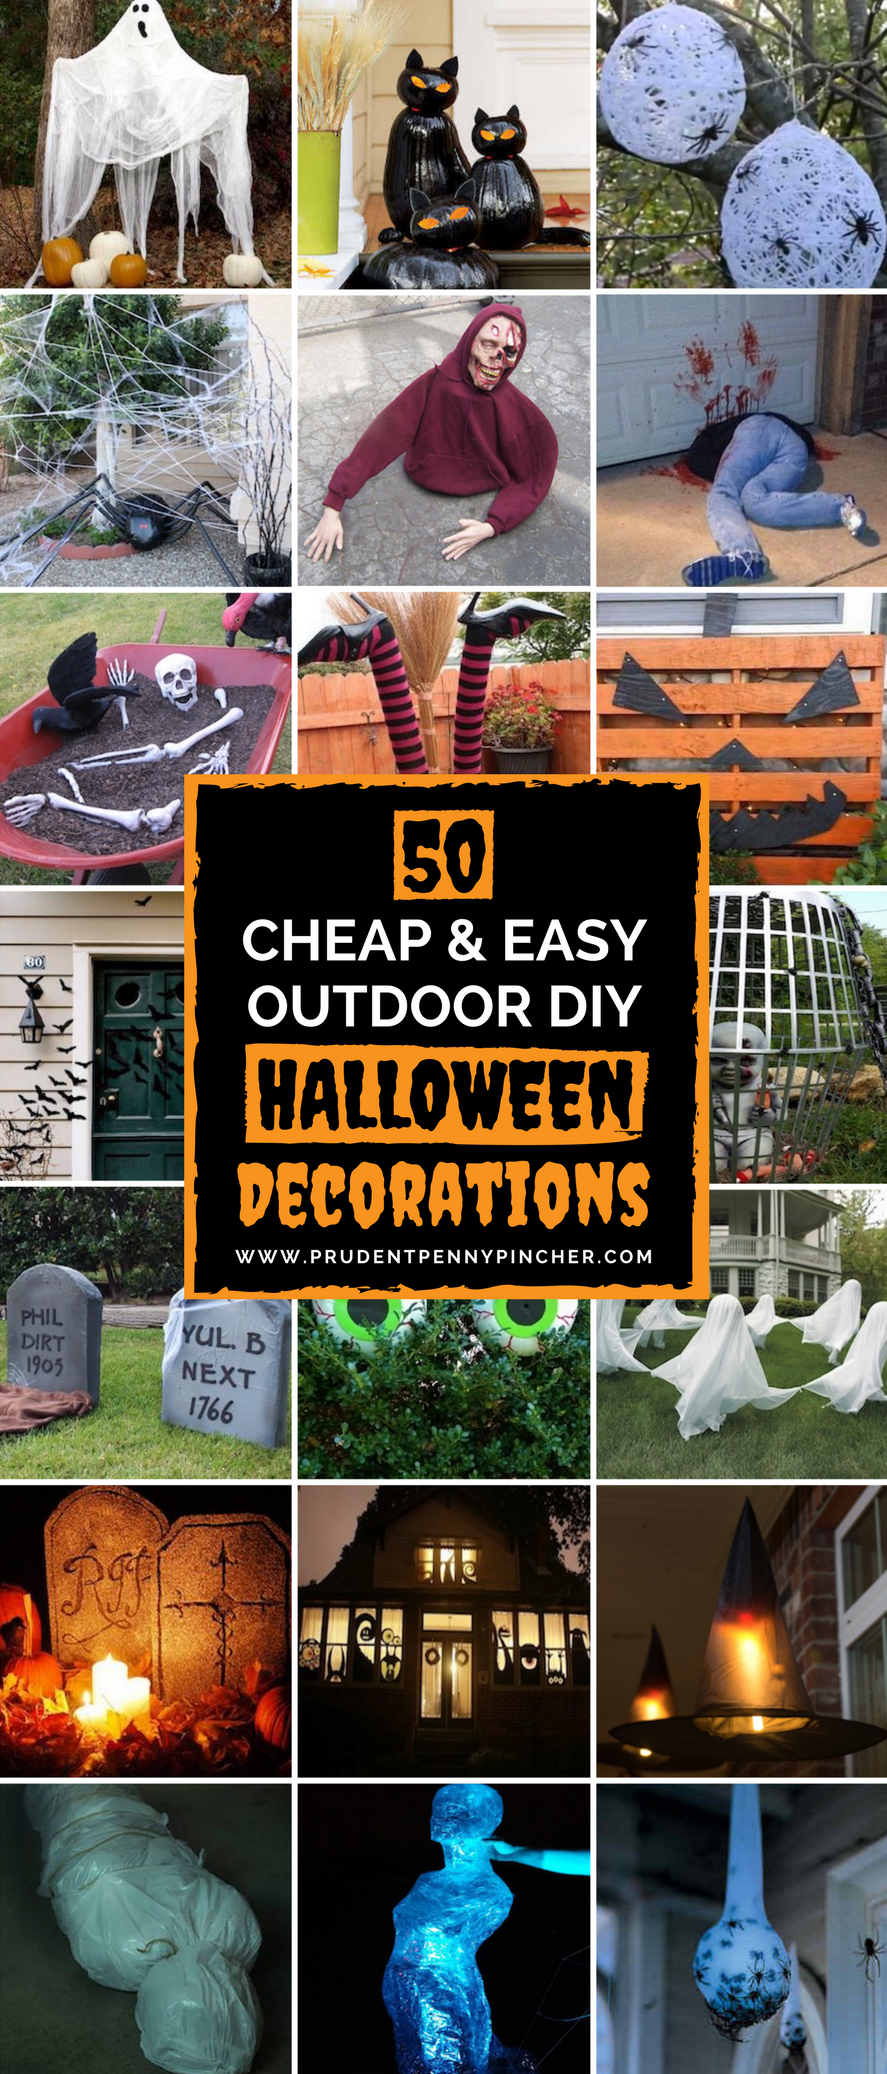 50 Cheap and Easy Outdoor Halloween Decor DIY Ideas - Prudent Penny Pincher